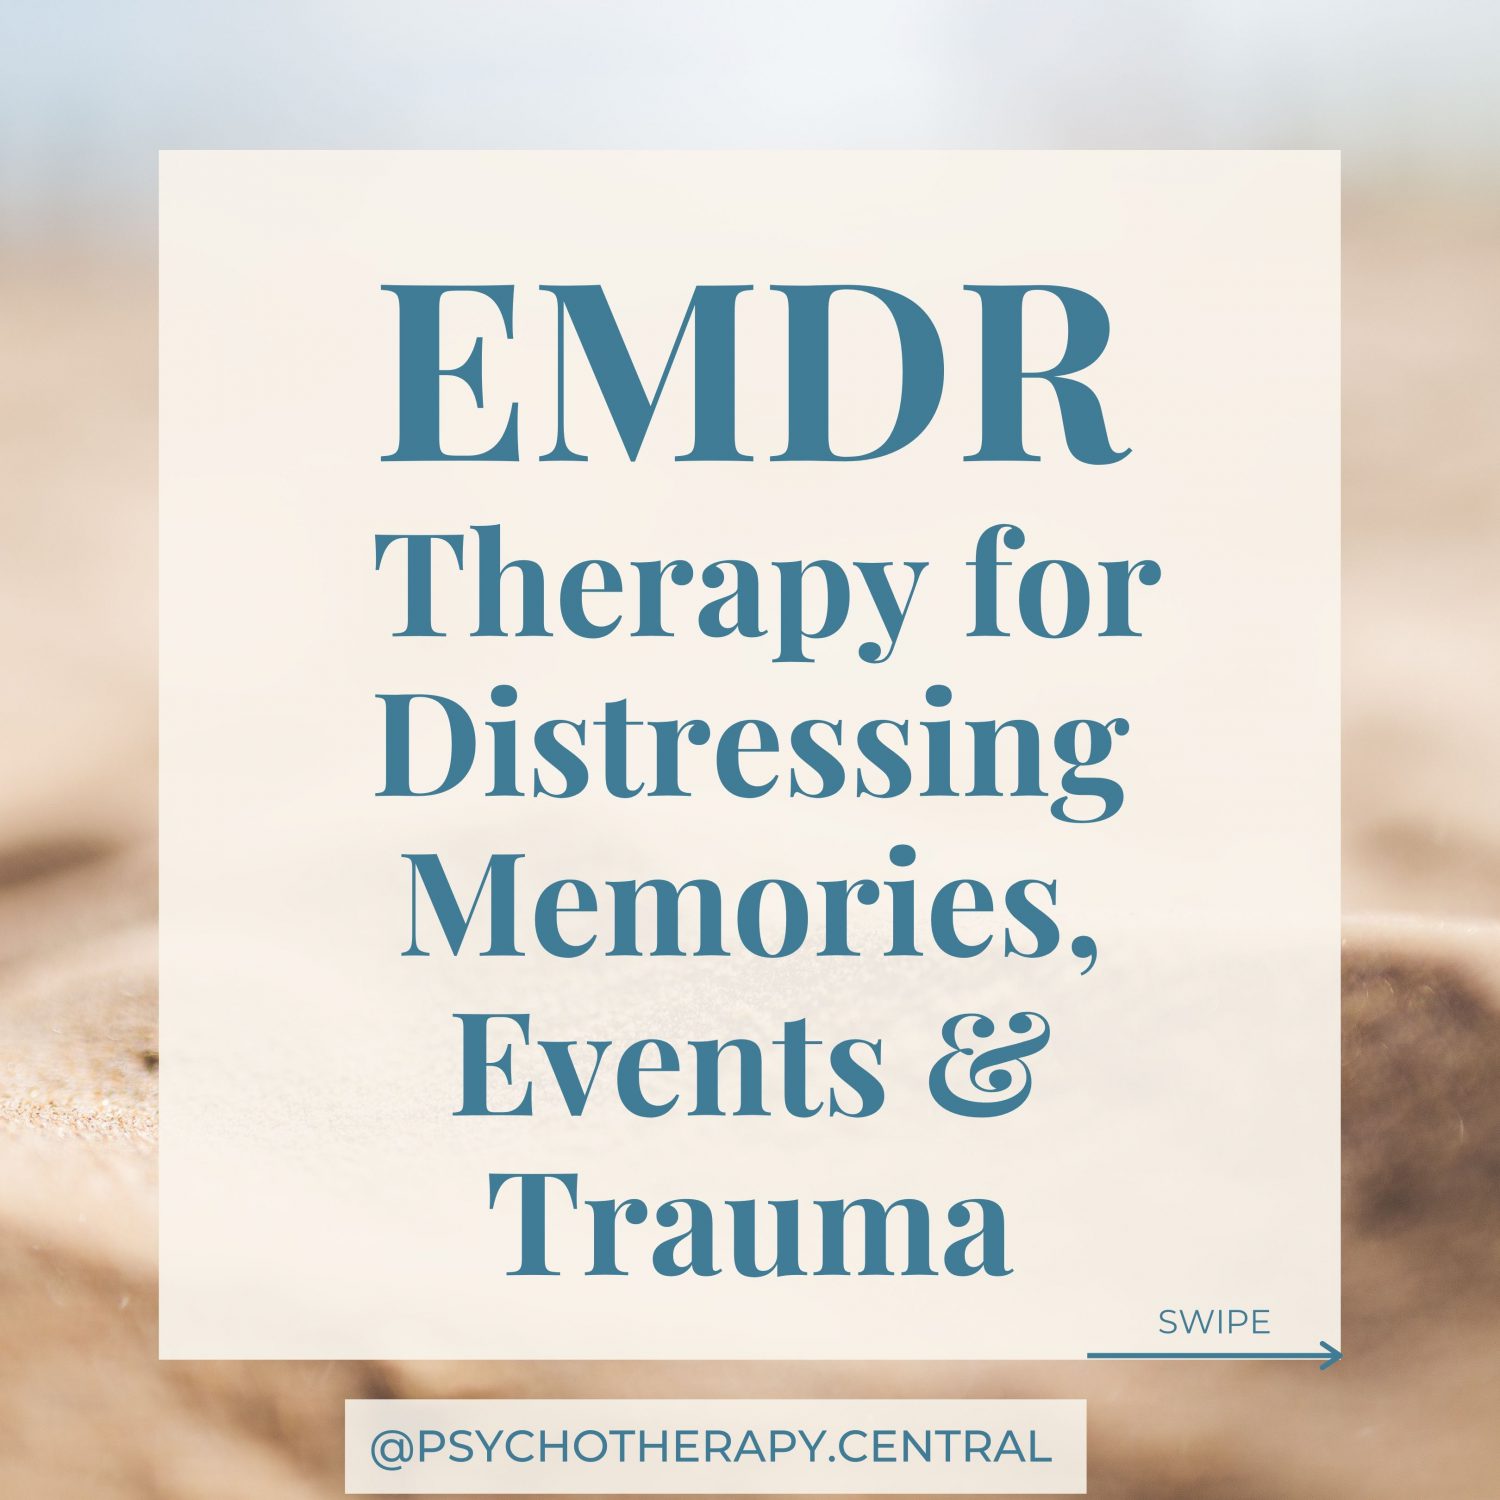 EMDR Therapy for Distressing Memories and Events